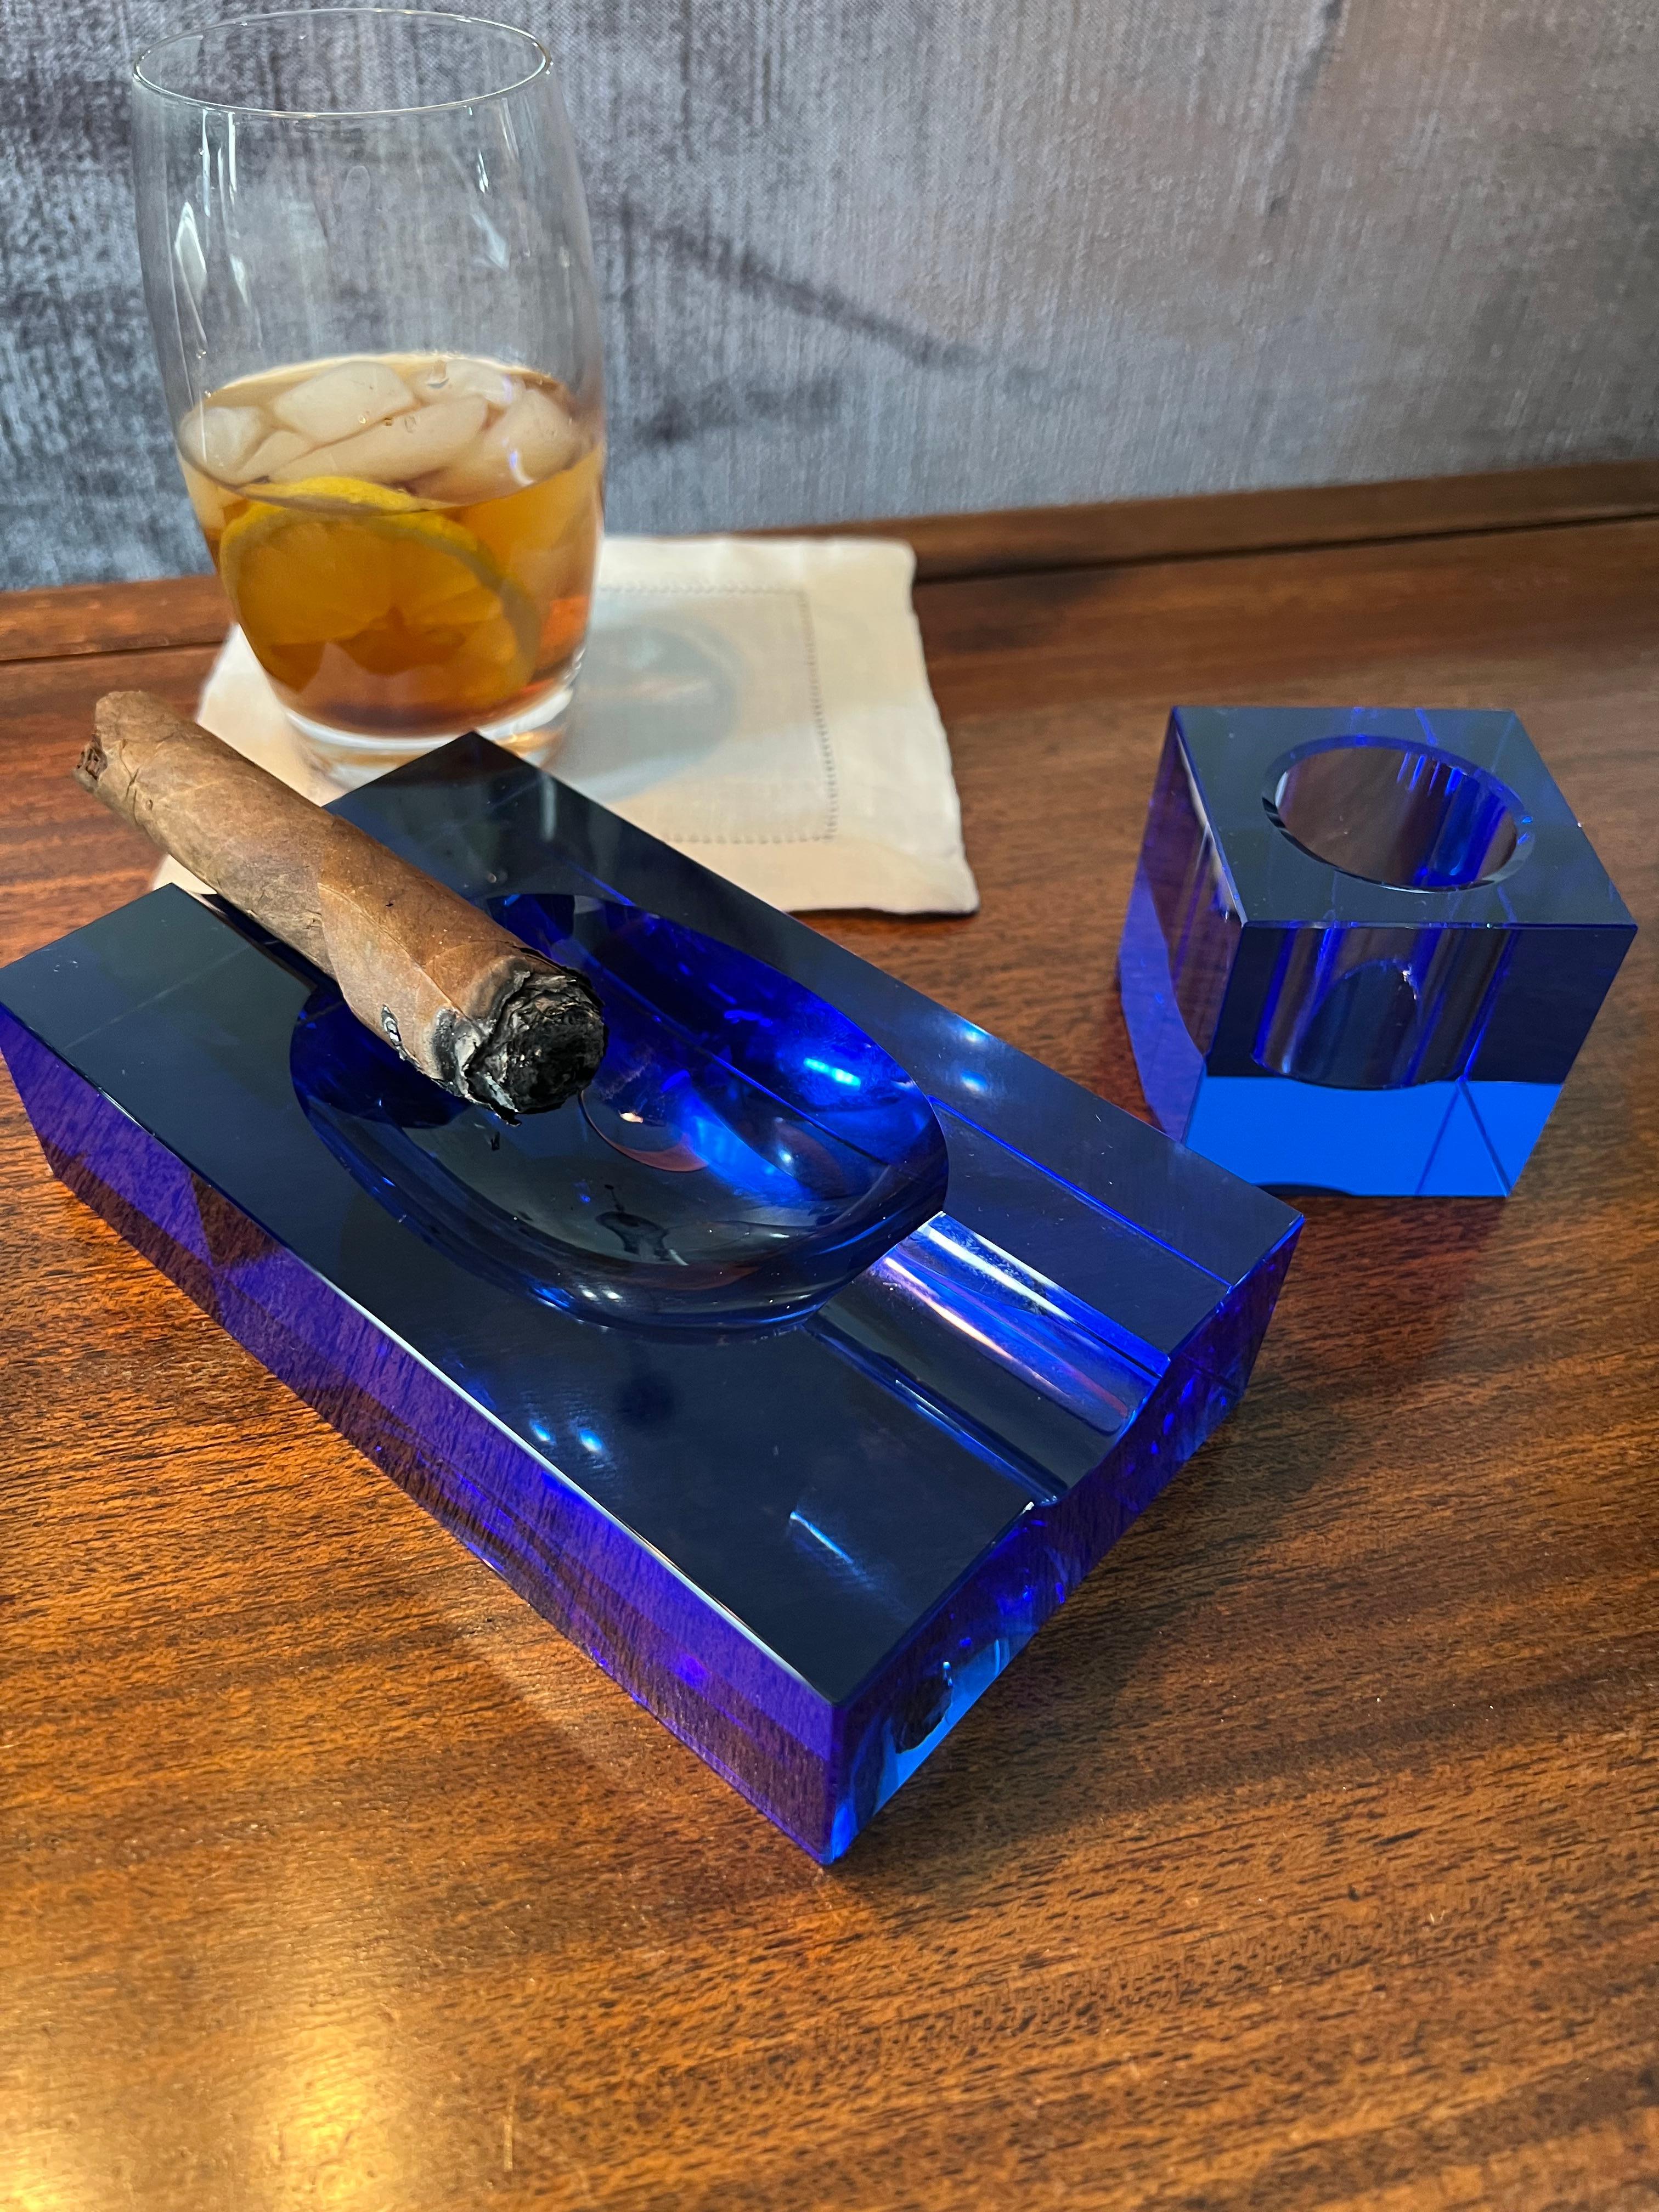 A truly stunning Cobalt blue ash tray perfect for those occasional cigars, 420 or french cigarettes! A compliment to any desk, bar, or smoking room.

The ashtray also comes with a lighter, and while it sparks we cannot seem to get I to light - the